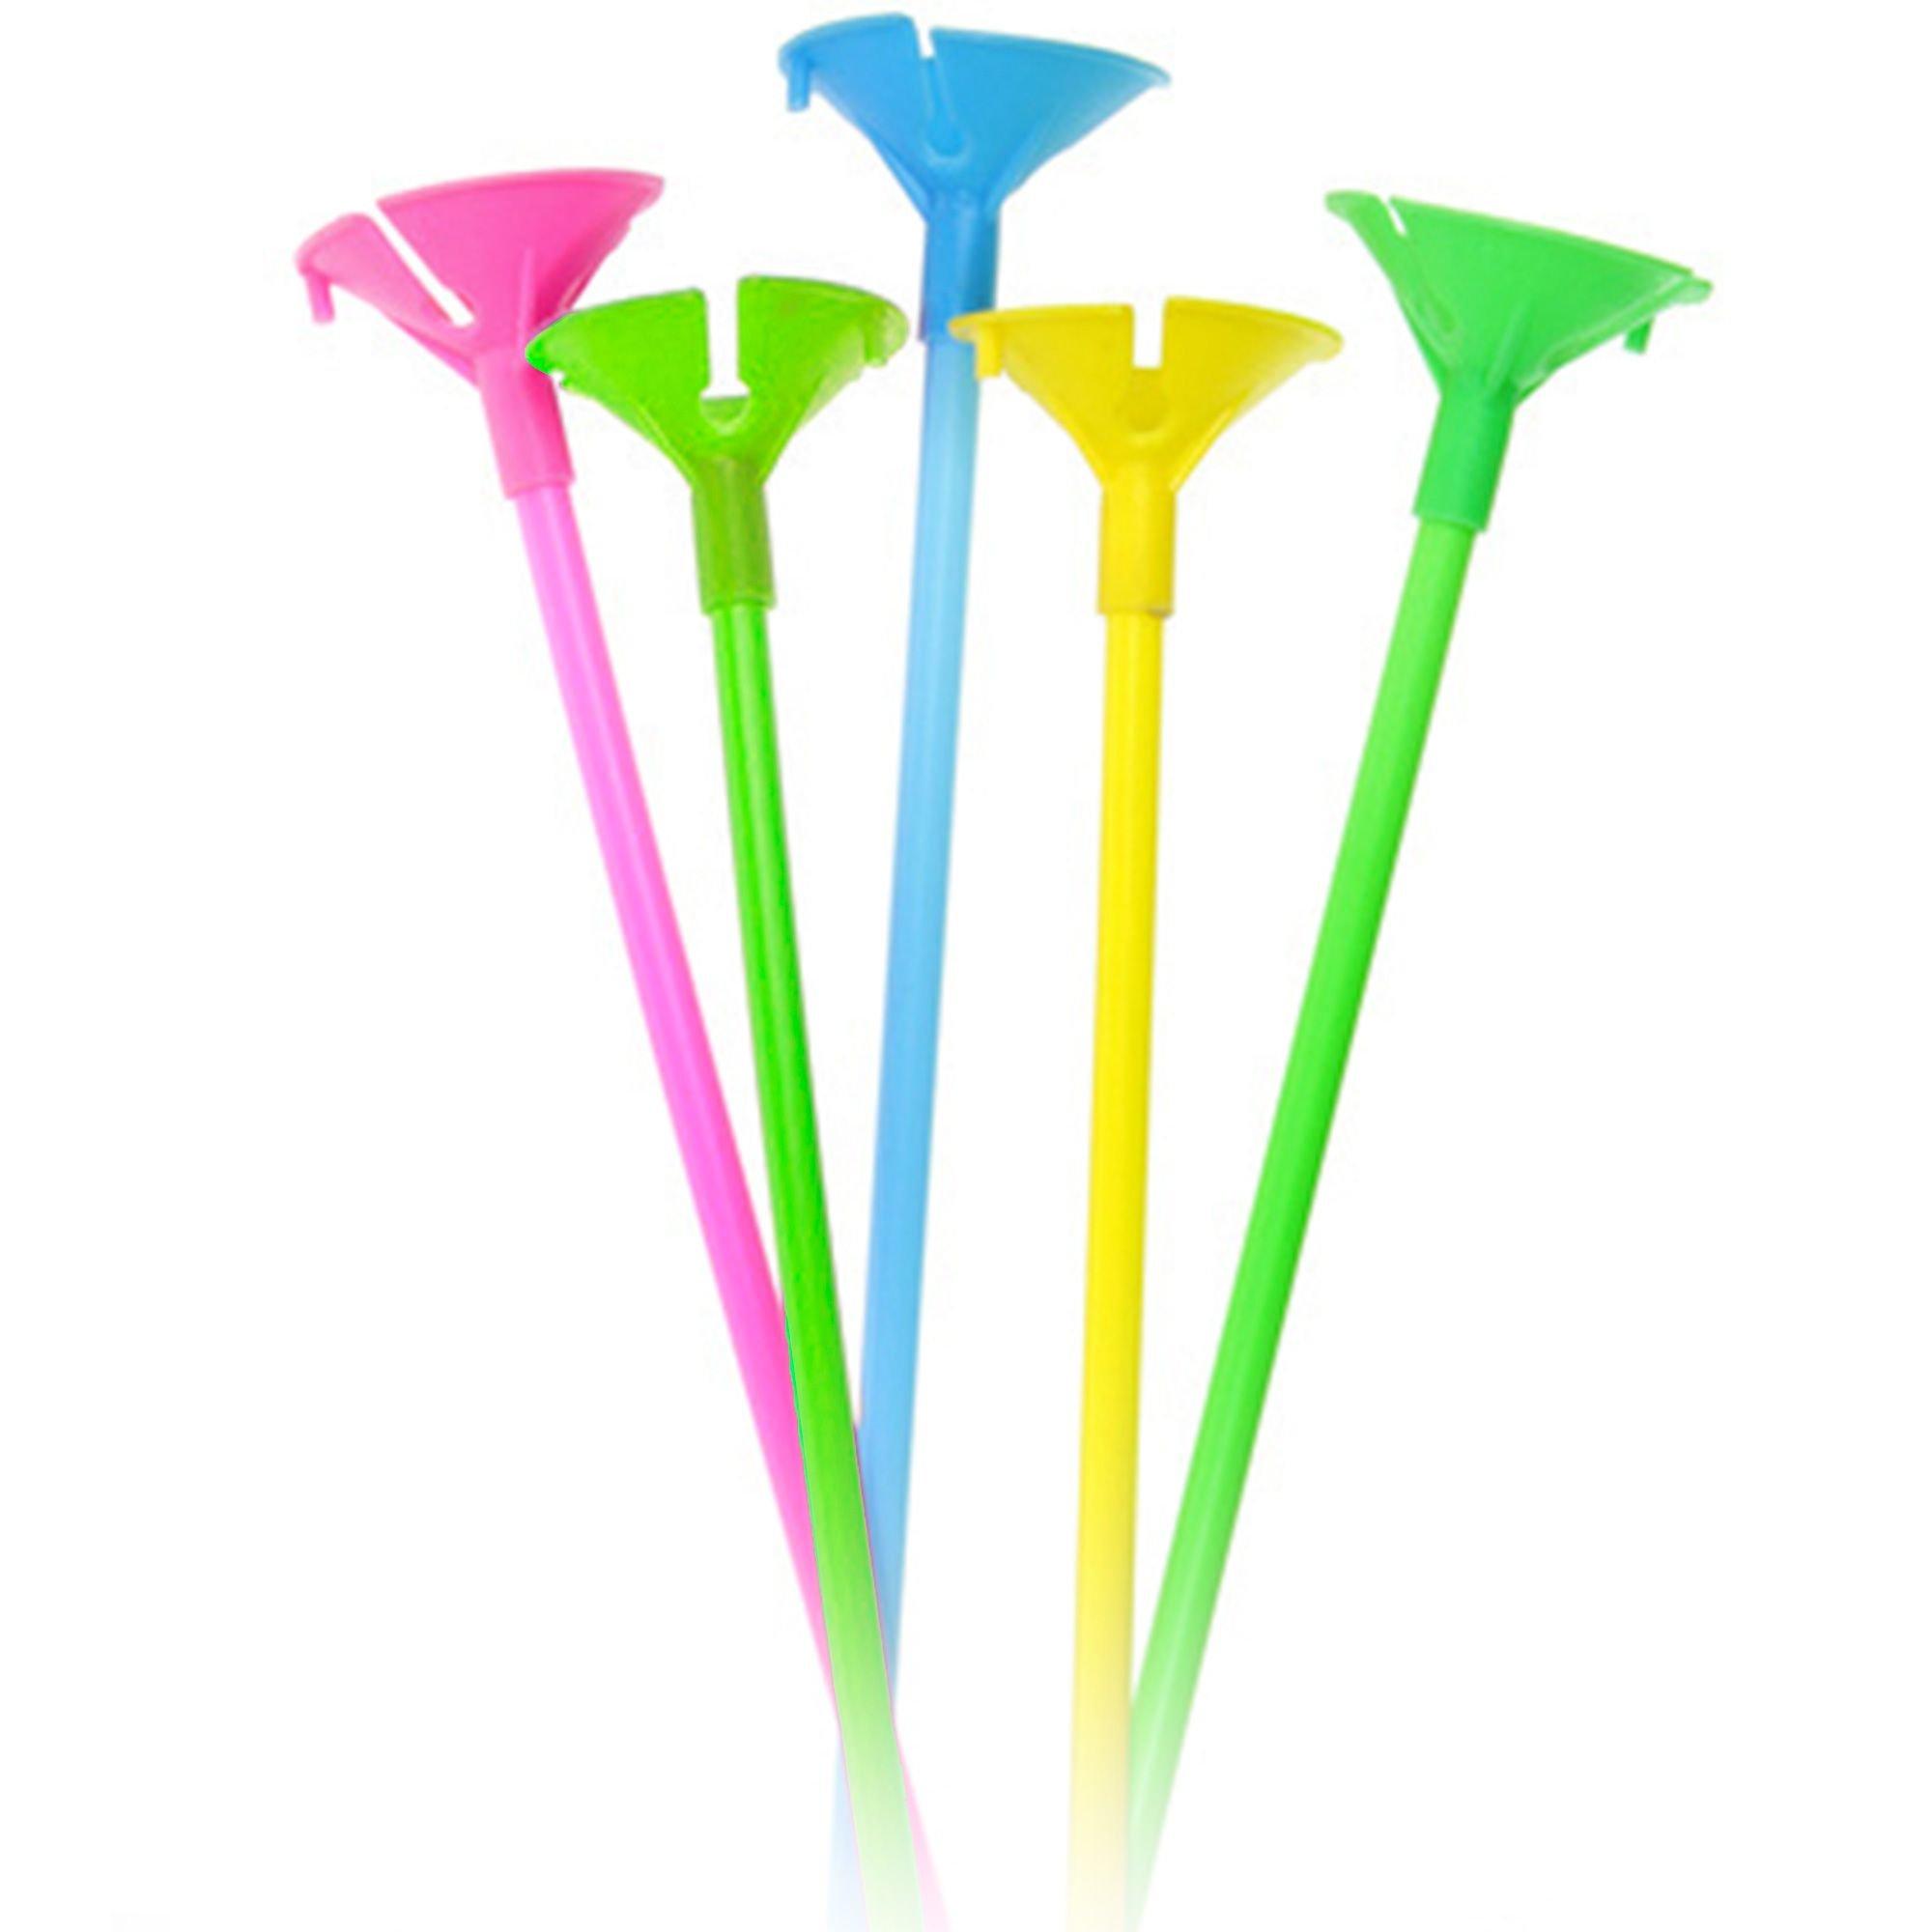 Balloon Sticks with Cups 4ct